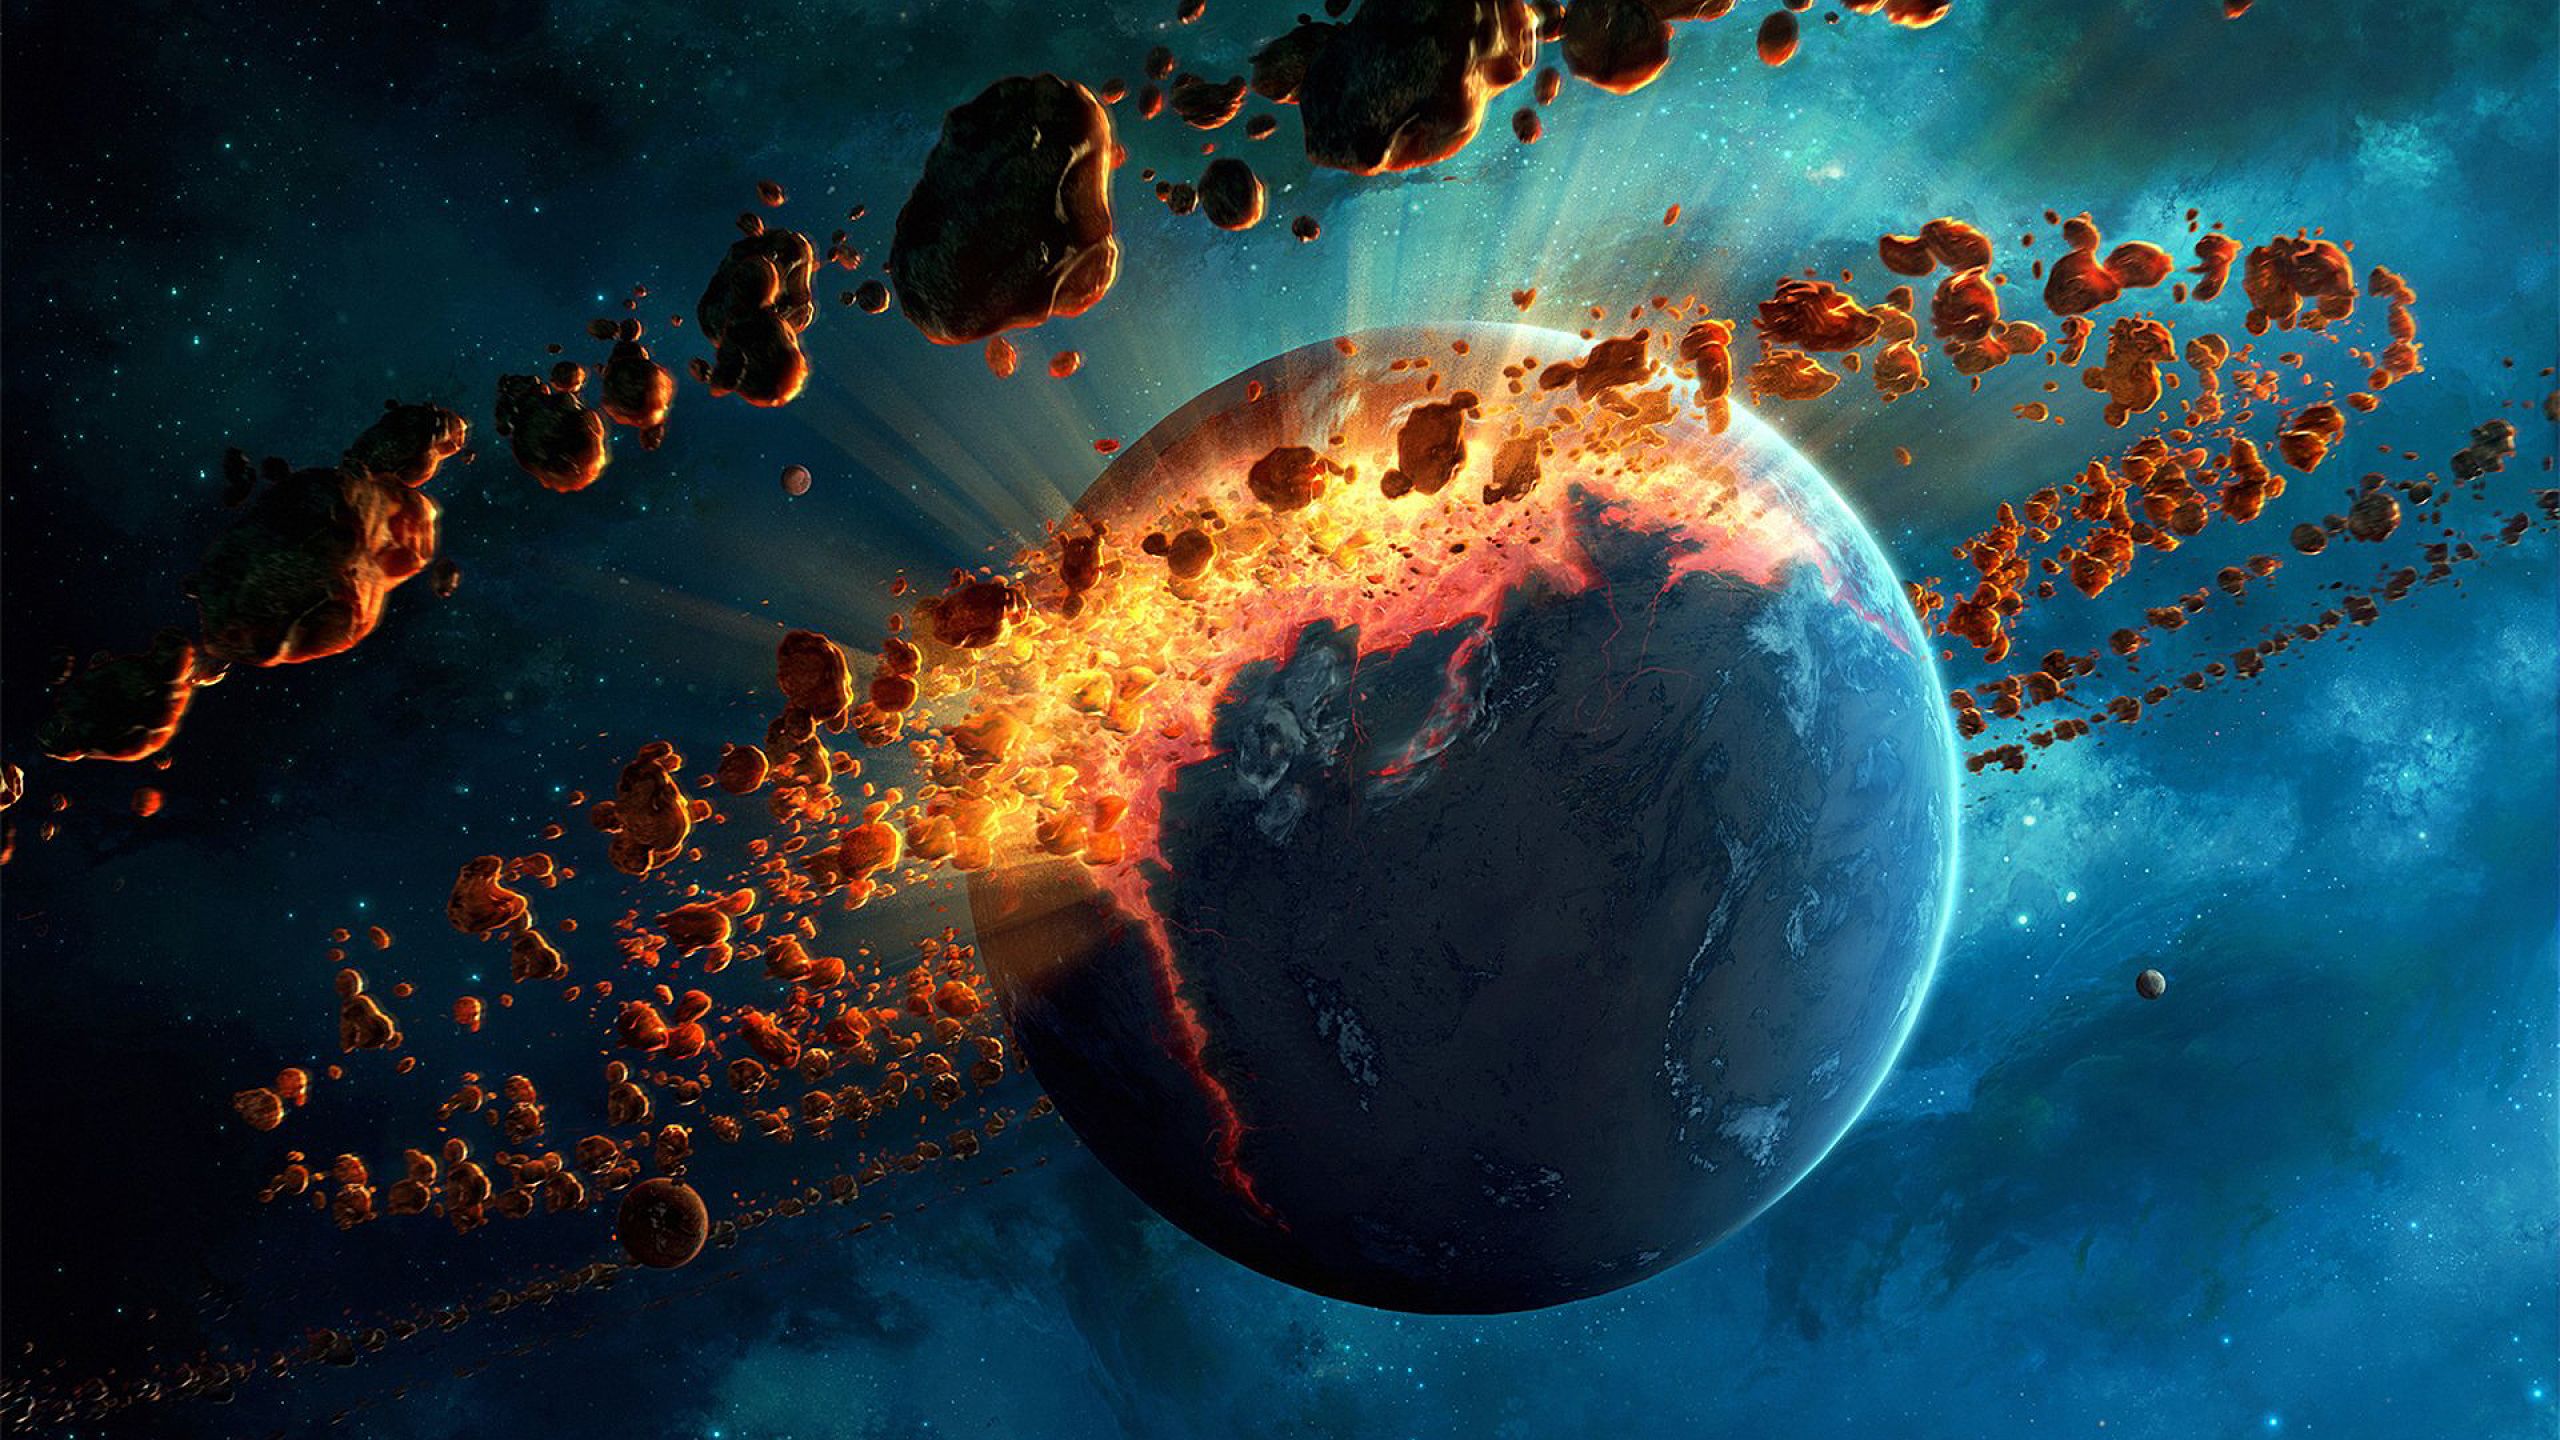 Asteroid Explosion 1440P Resolution Wallpaper, HD Space